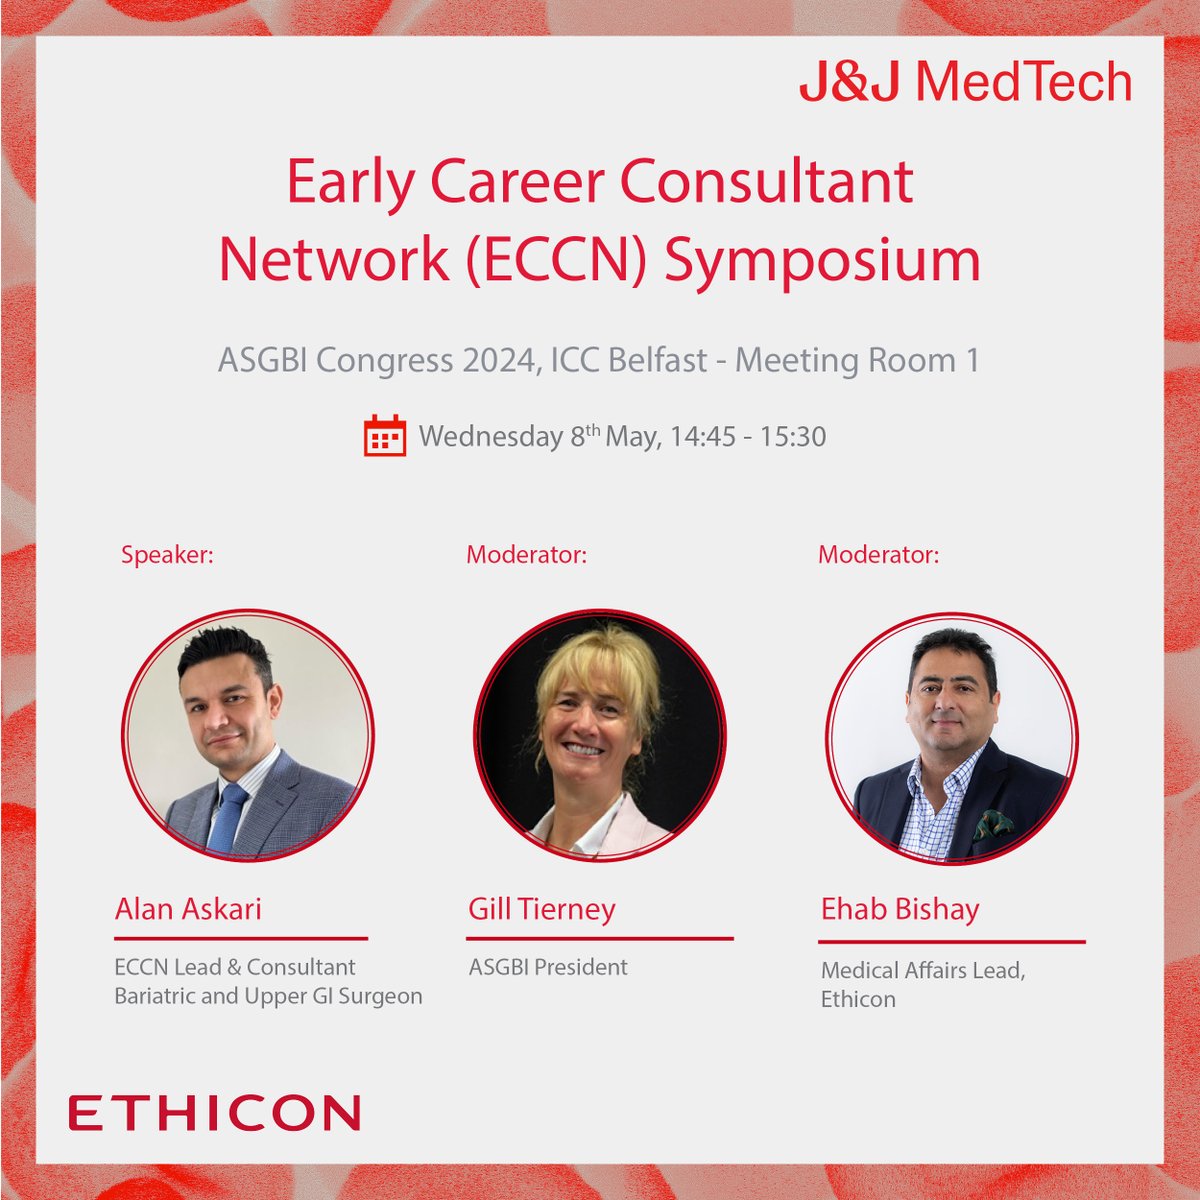 Tomorrow our @Ethicon team are hosting two exciting symposiums live from the @ASGBI Congress 2024! Join us at 2pm in Meeting Room 1 to hear our faculty discuss how to use new guidelines for improving anastomotic outcomes in surgery.